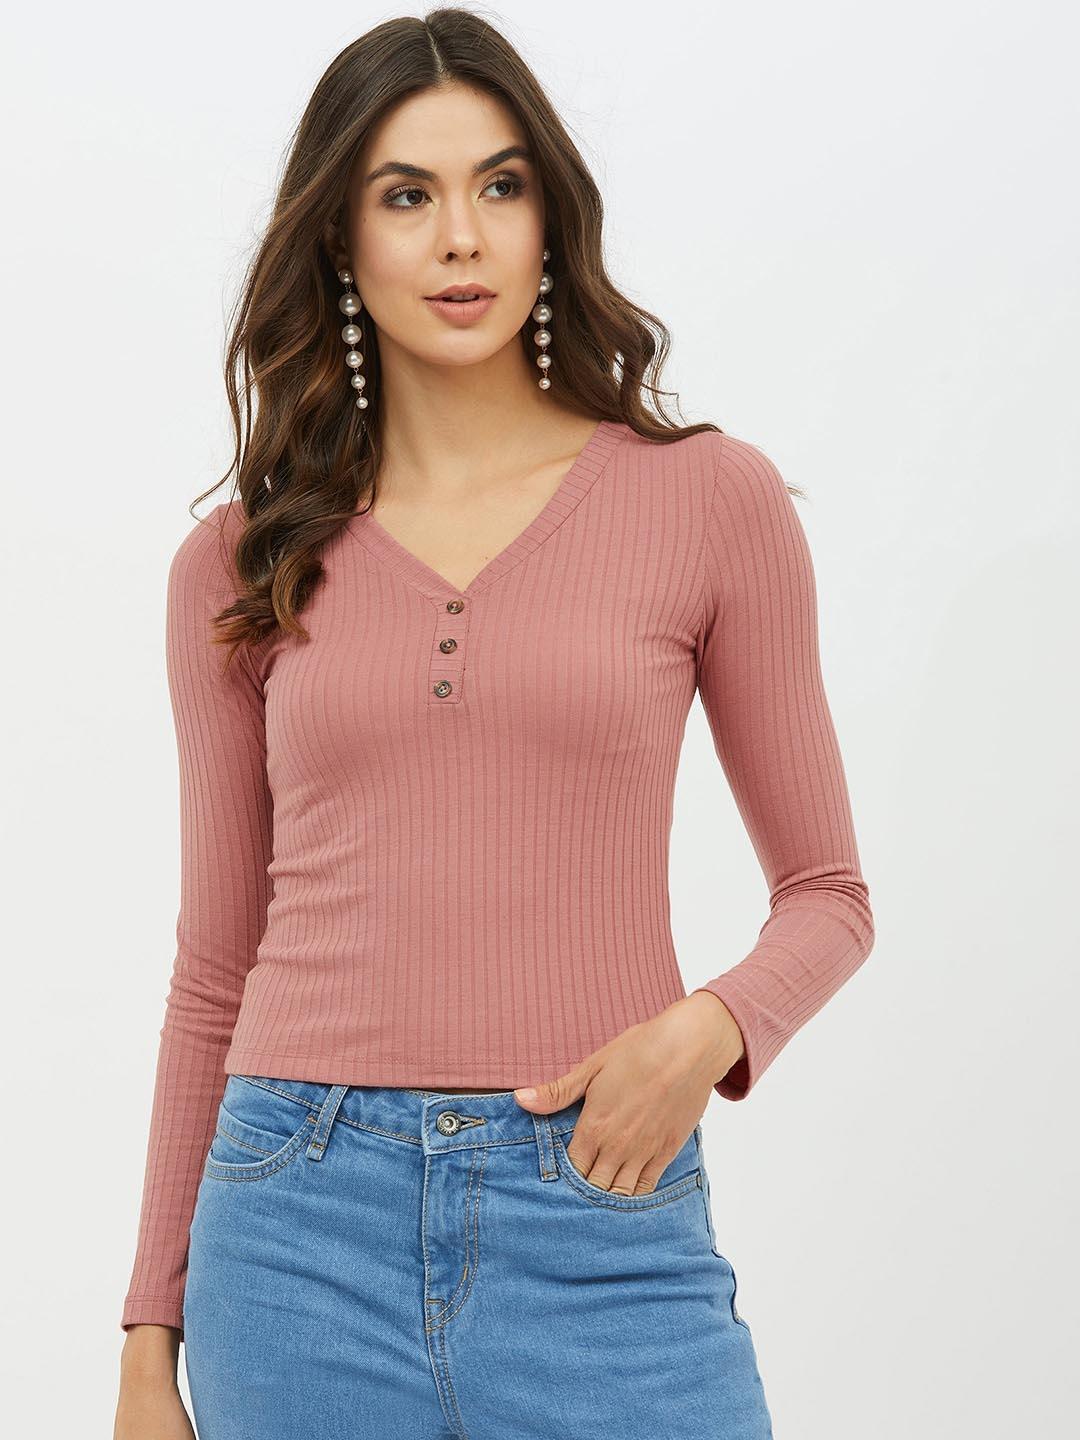 harpa-women-pink-striped-fitted-top